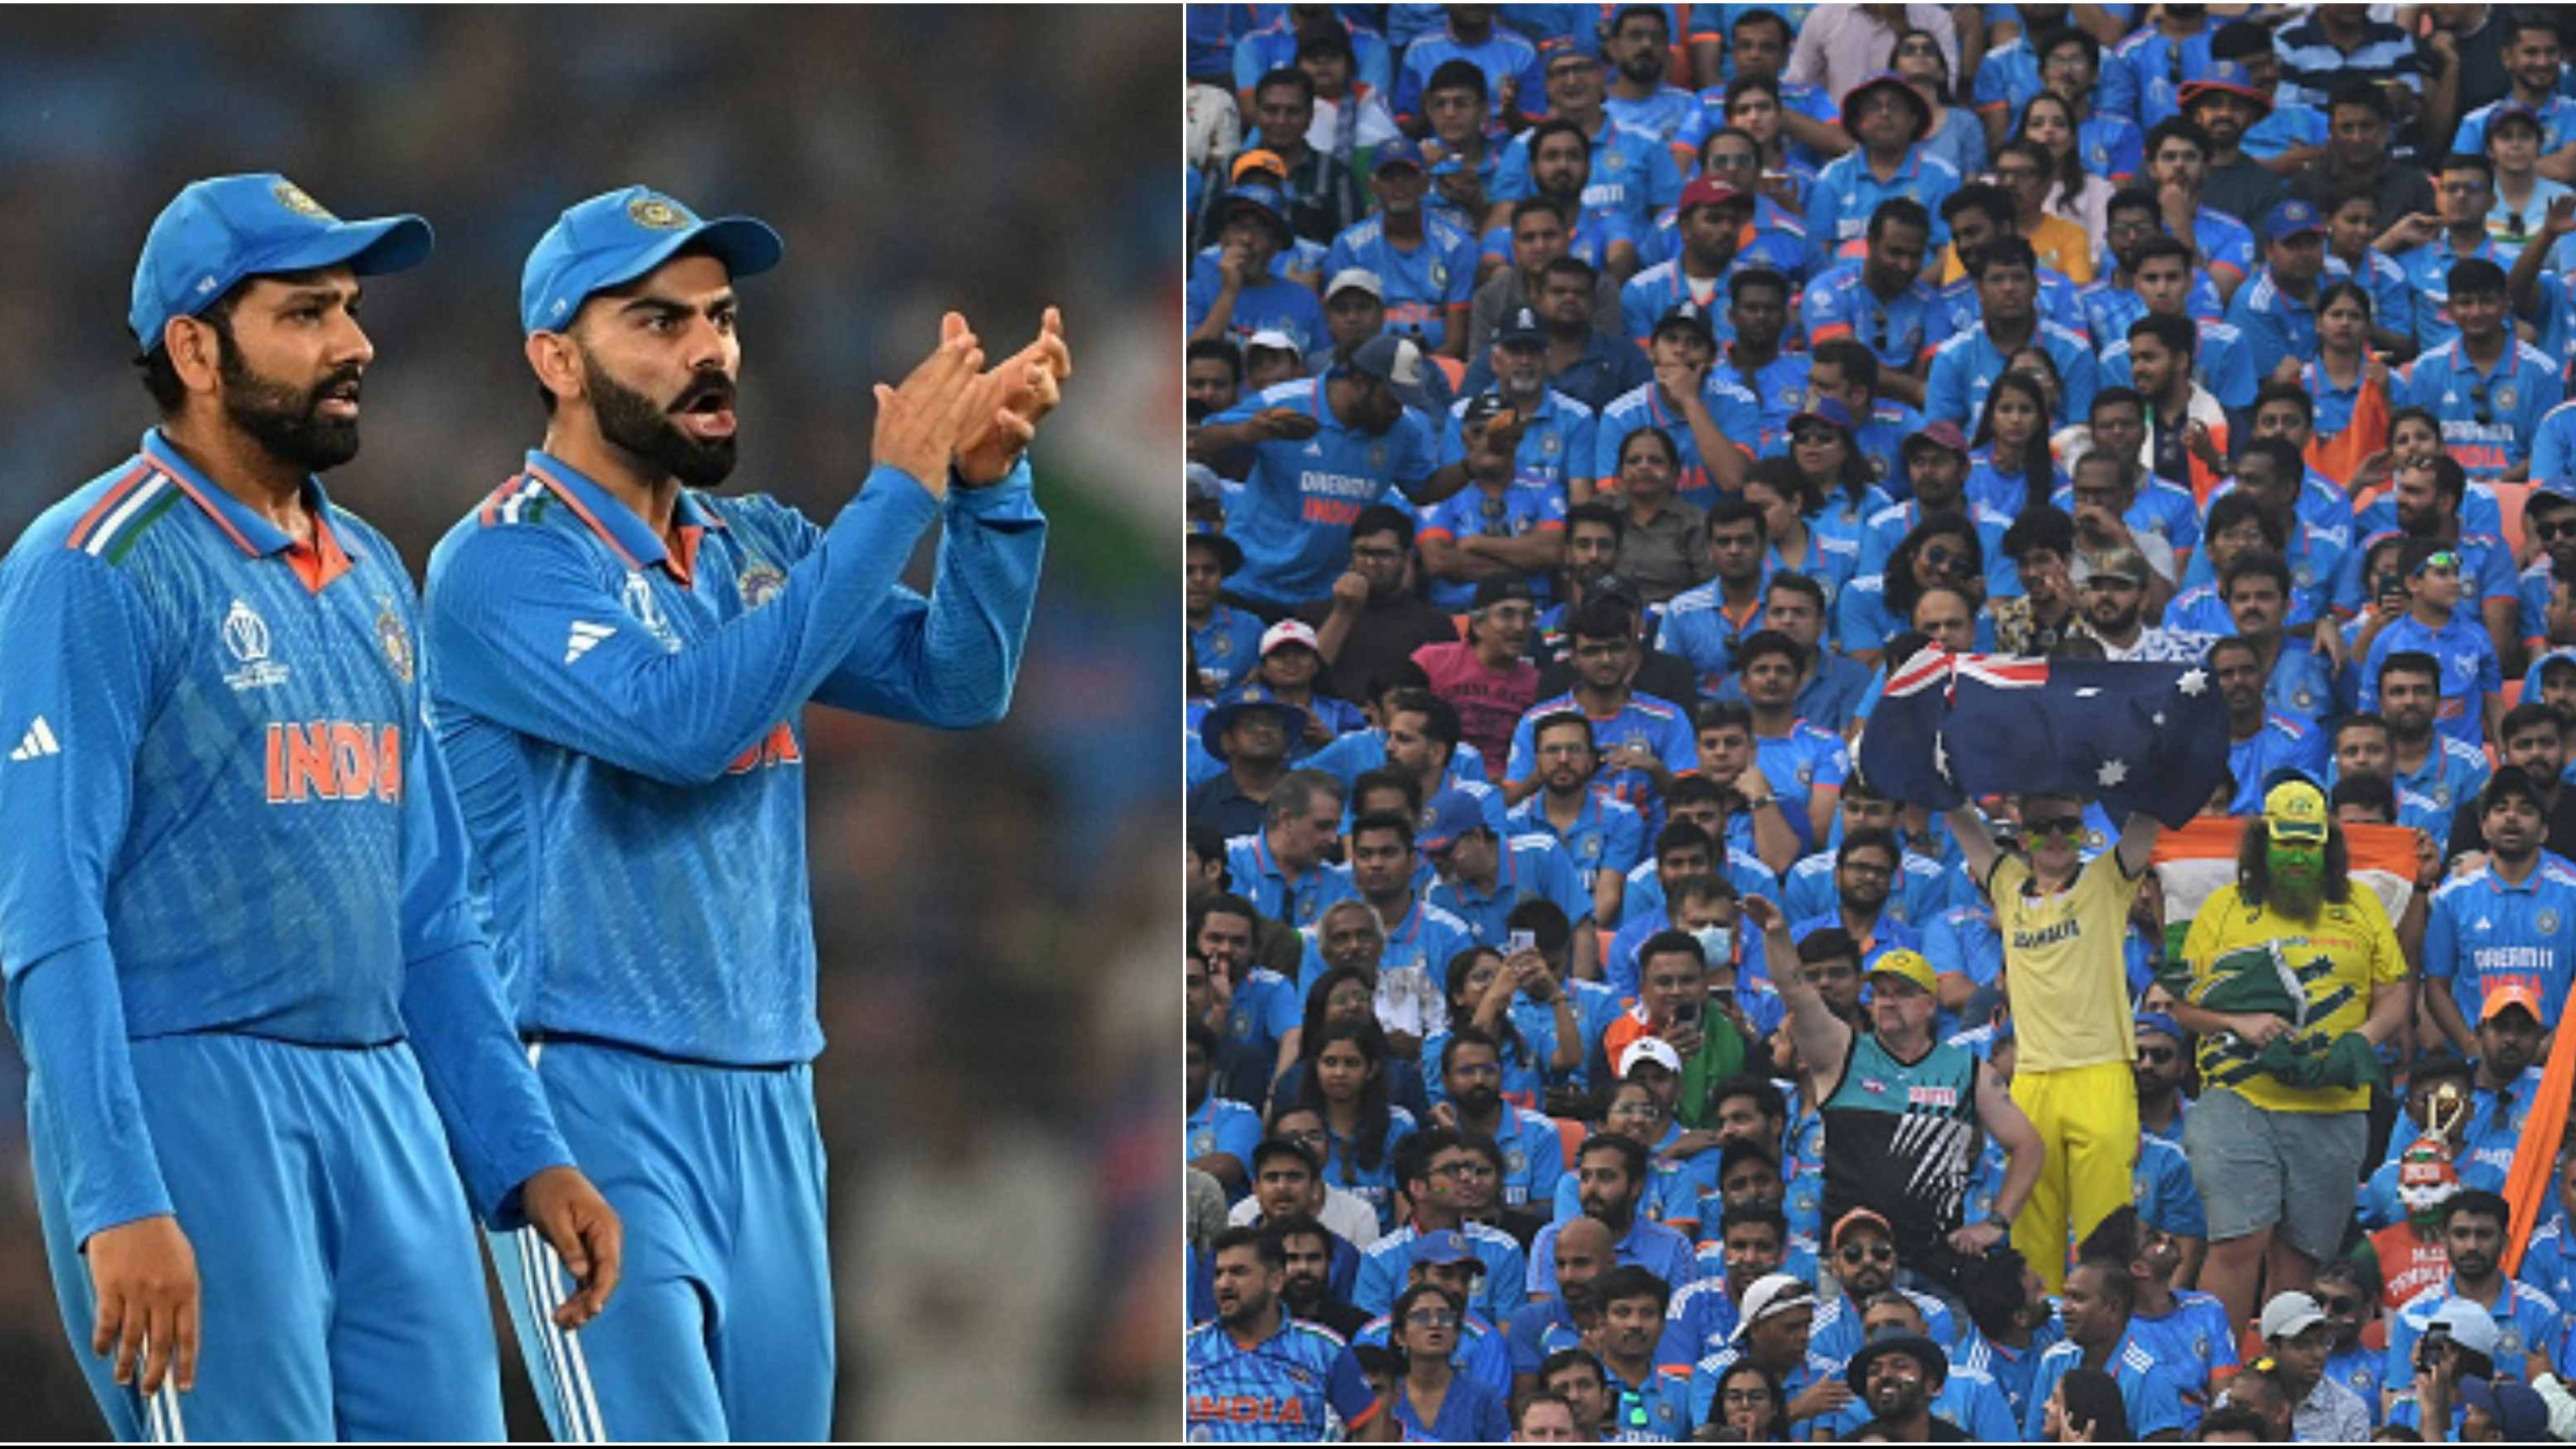 CWC 2023: Ahmedabad crowd slammed for not lifting Team India’s spirits and disrespecting Australian players, match officials